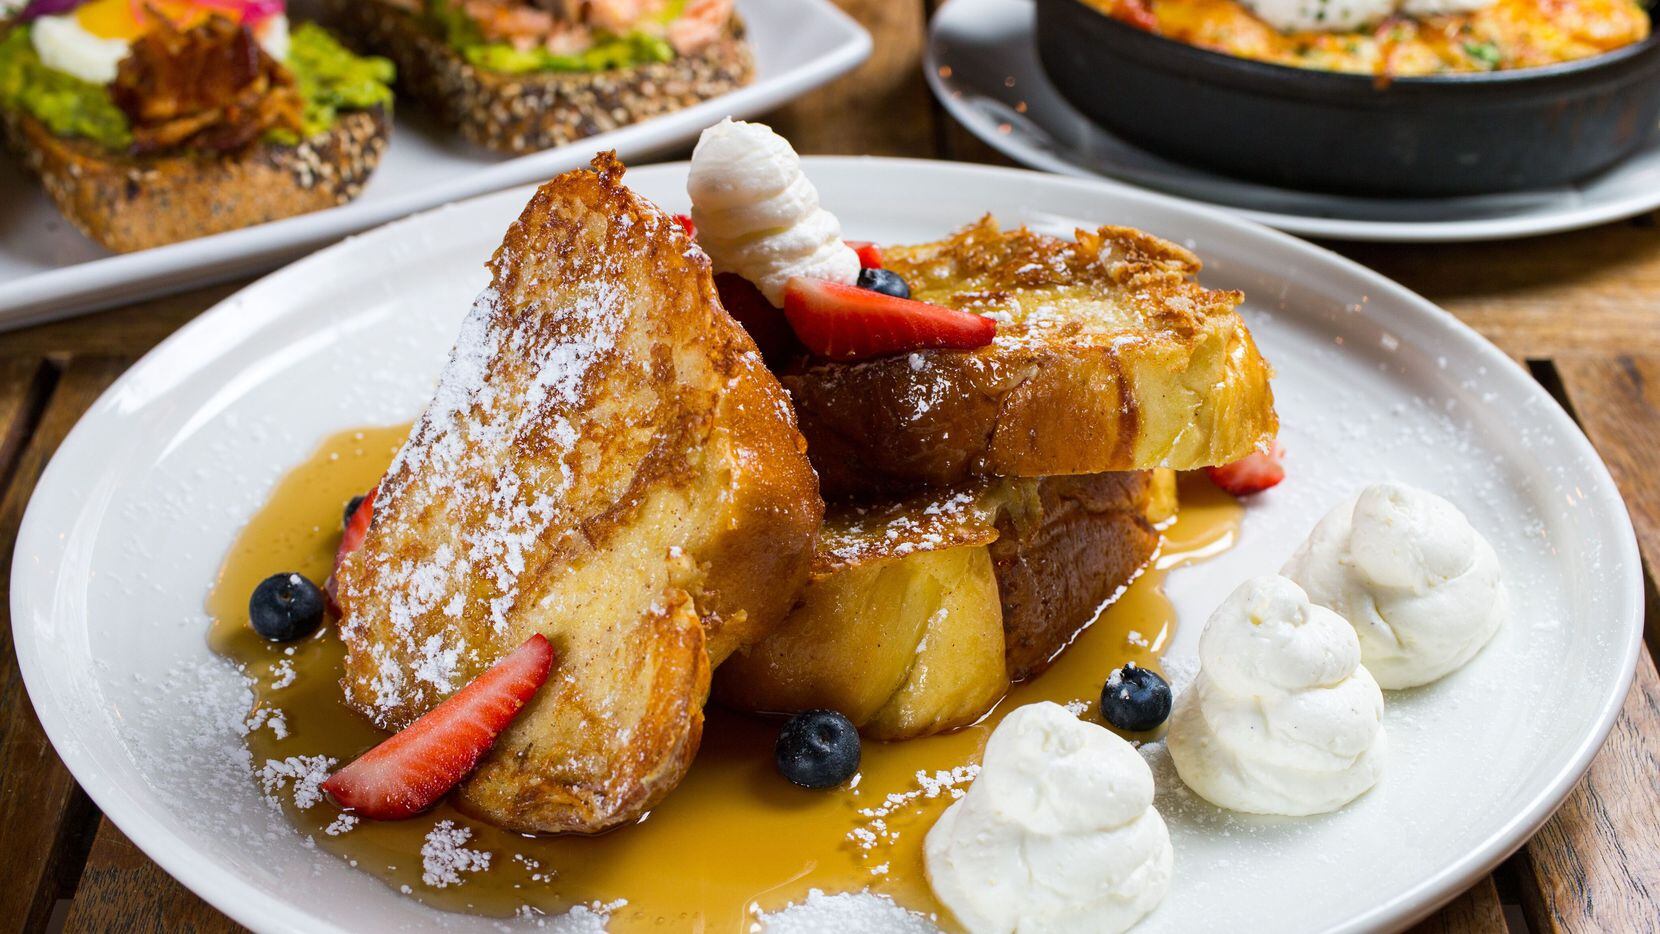 TJ's Seafood Market will serve challah french toast at its Preston Royal location this Easter.